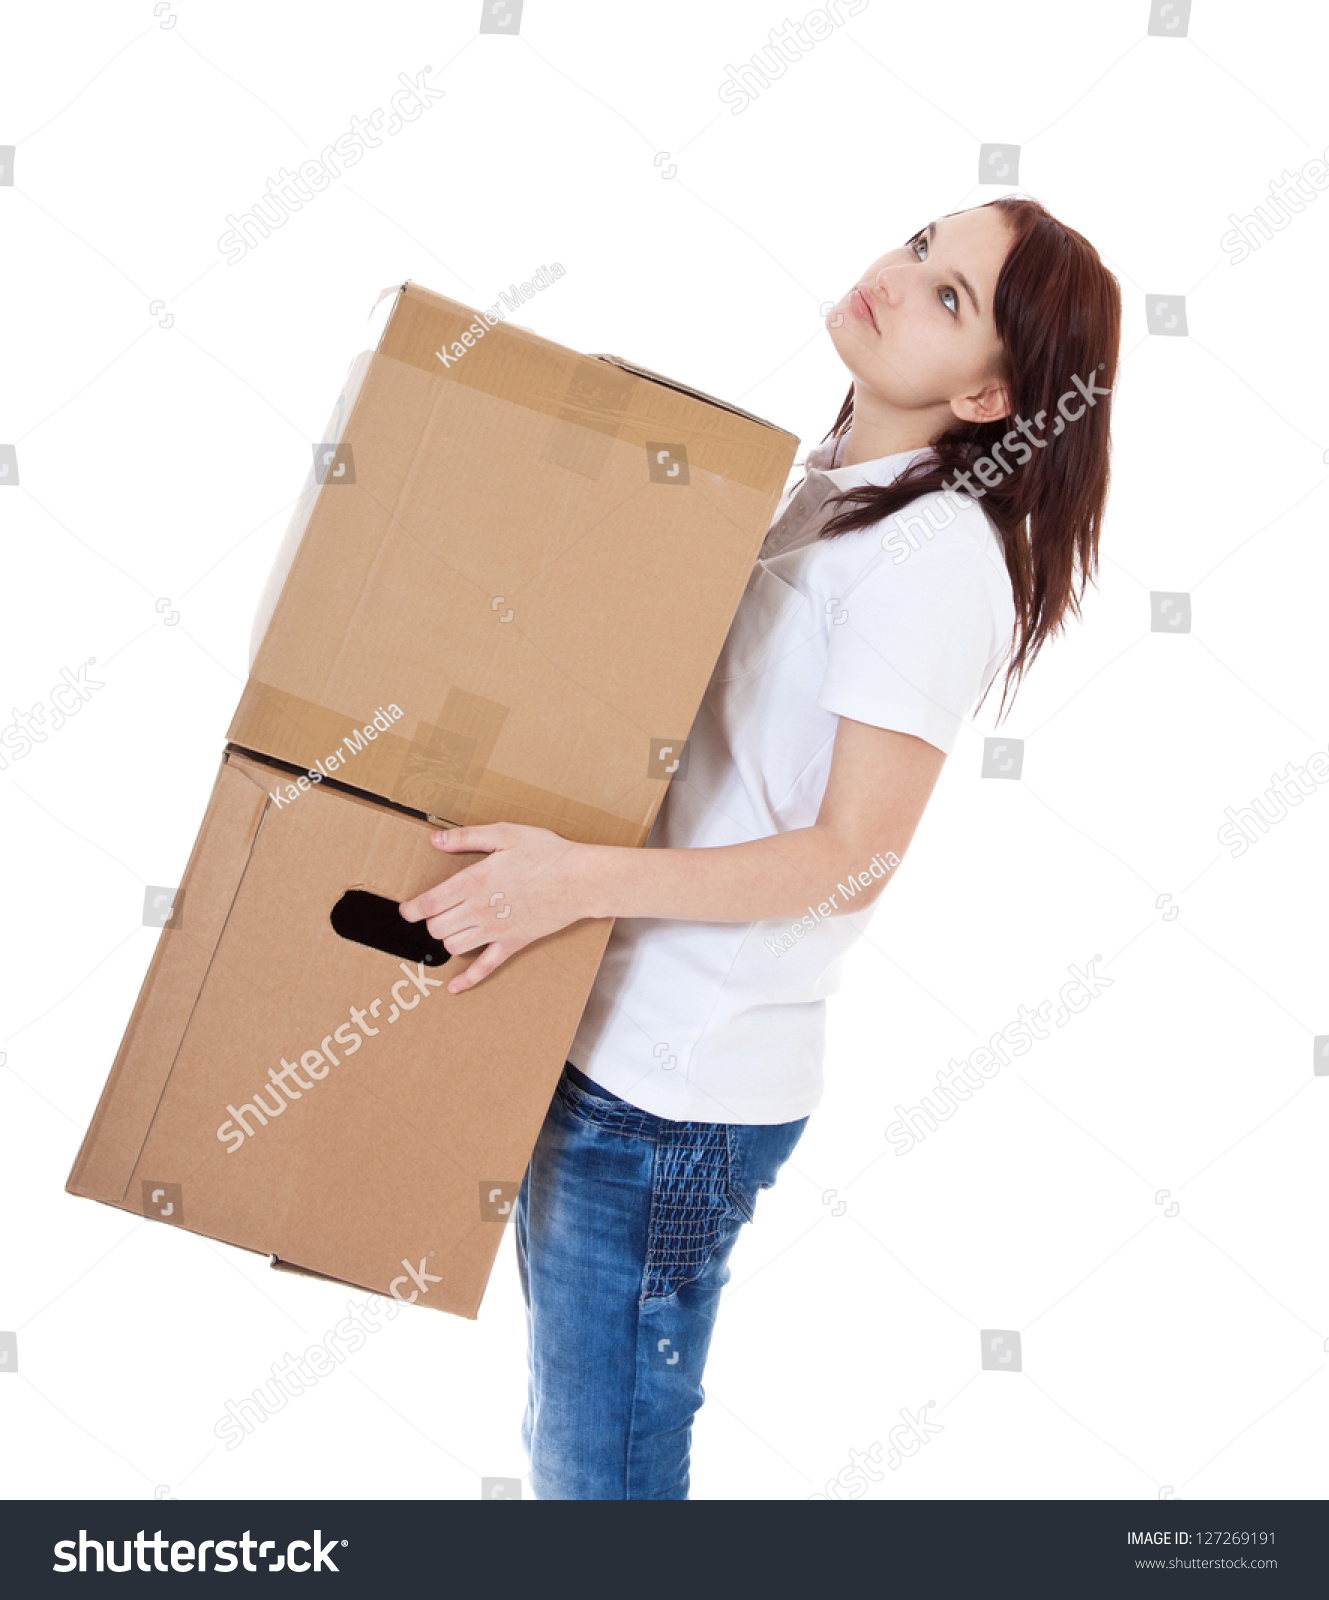 carrying moving boxes